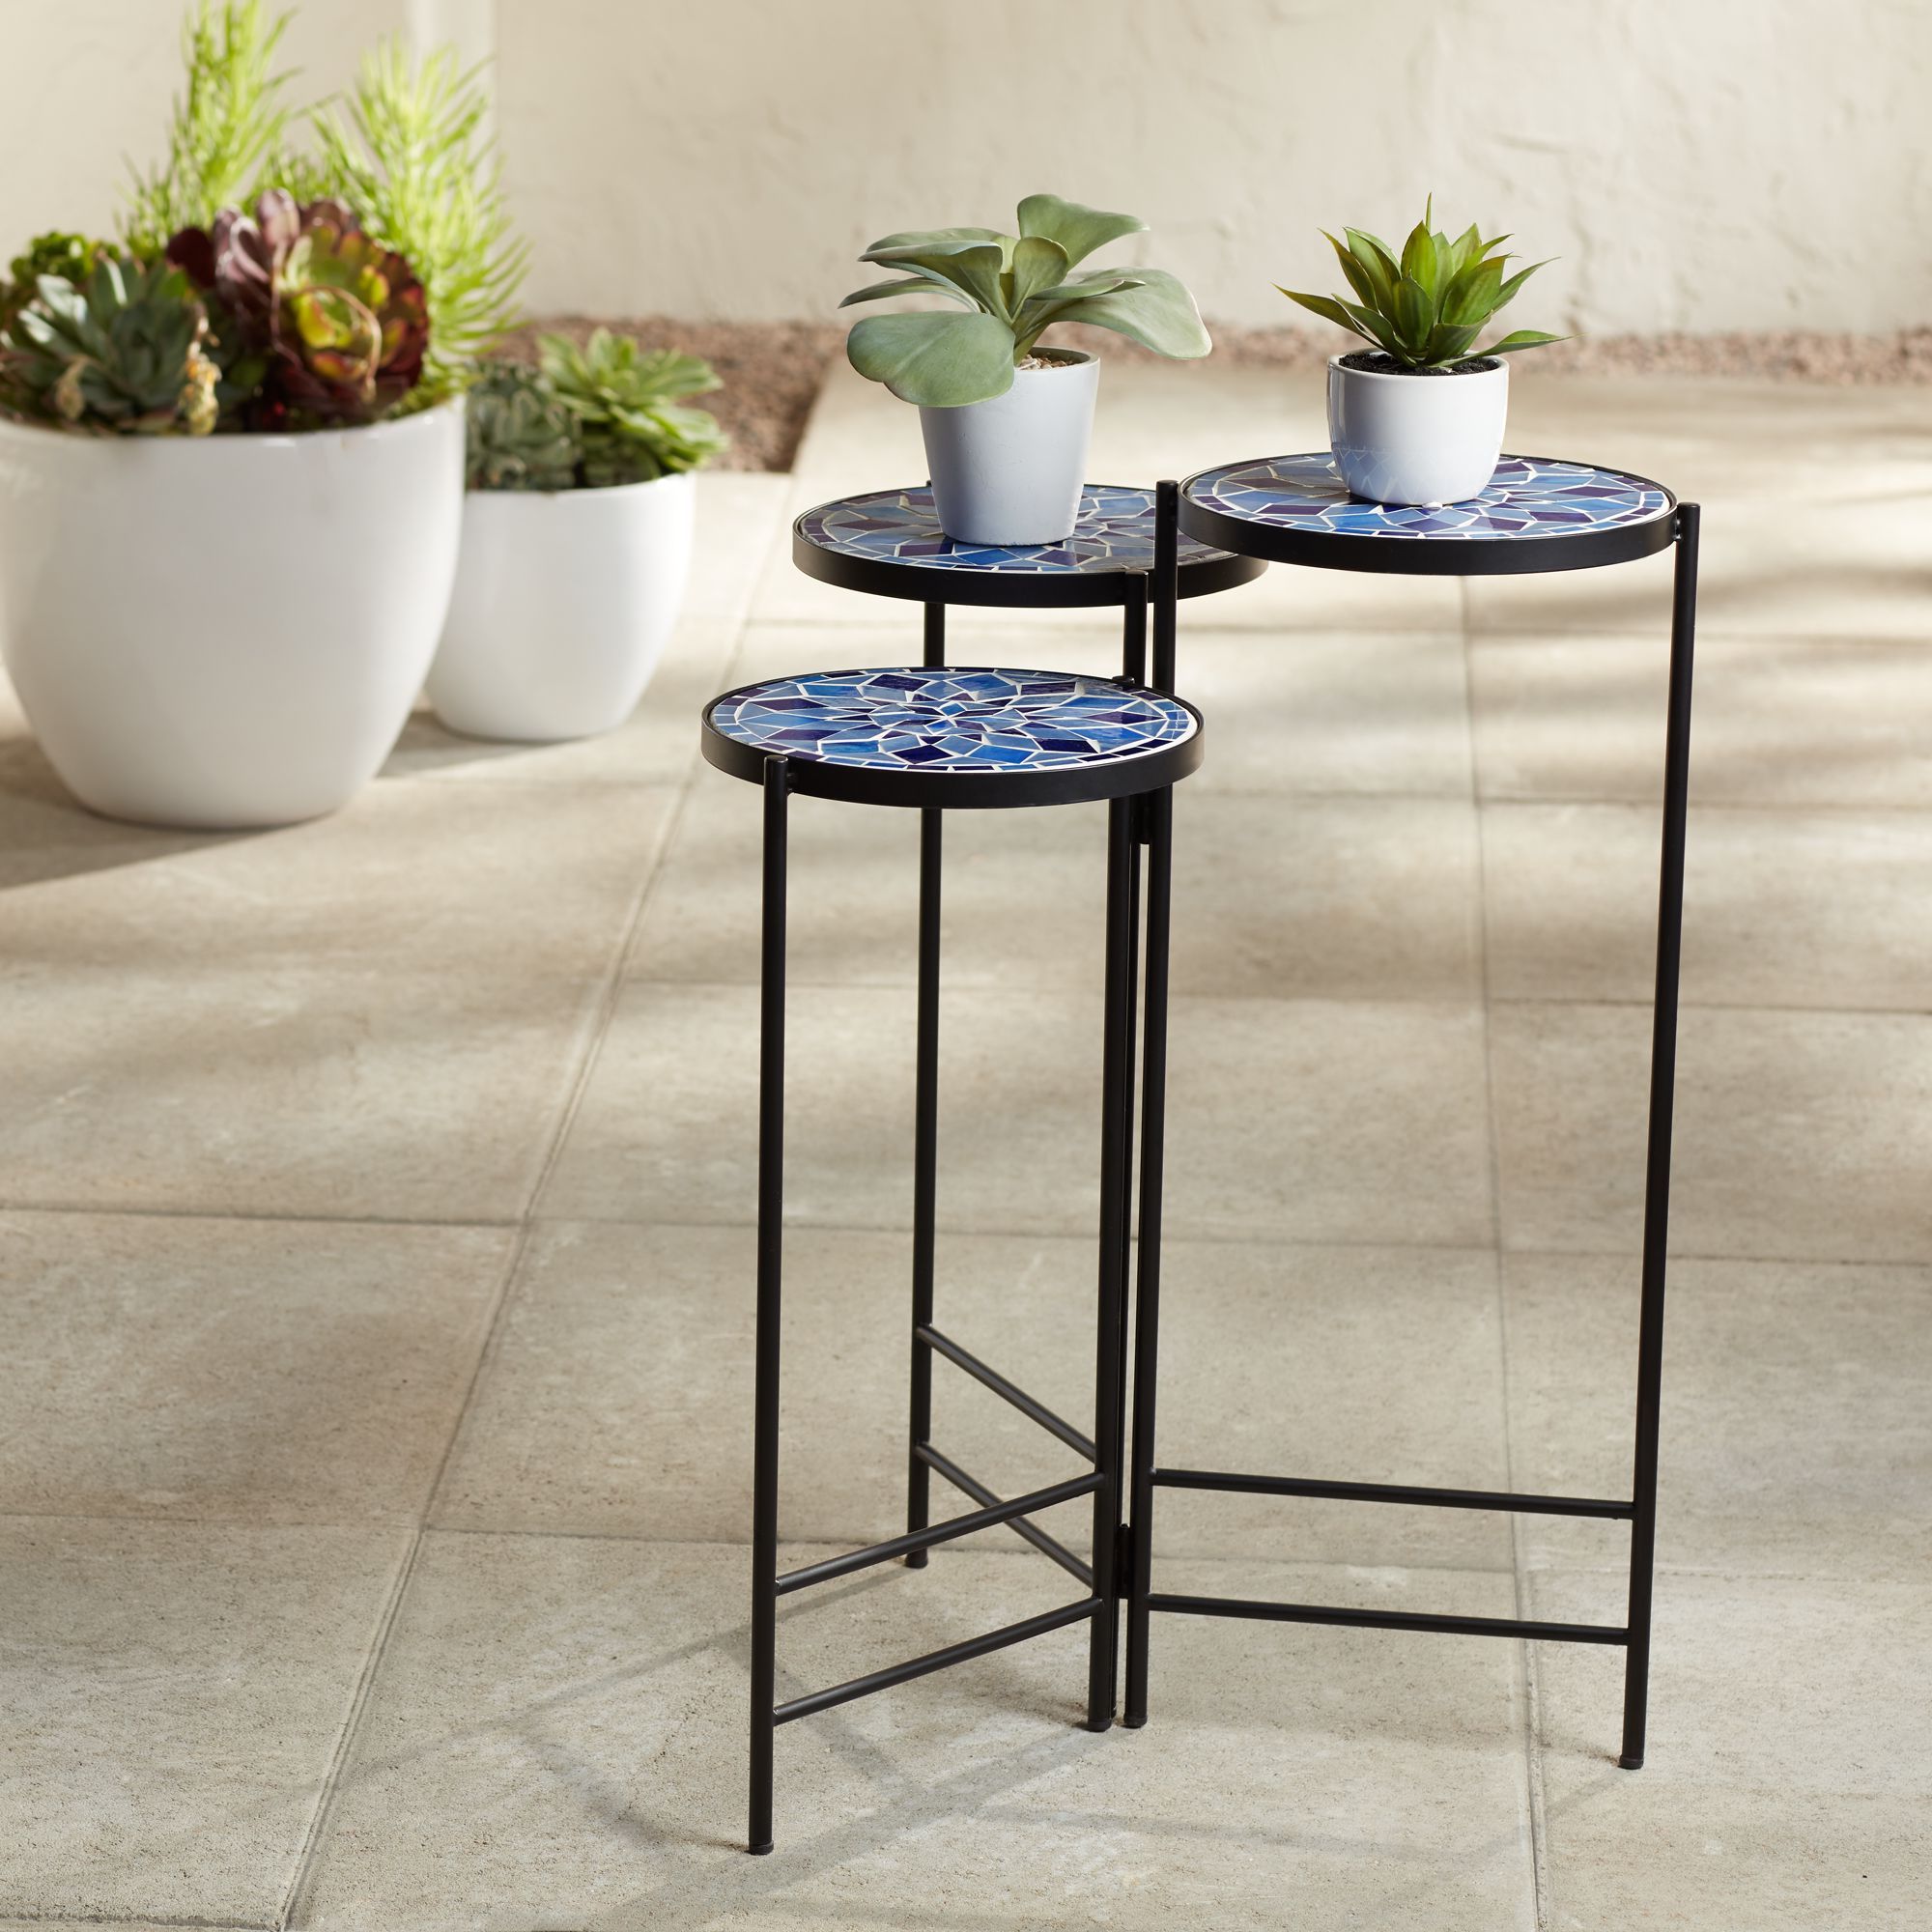 Teal Island Designs Blue Mosaic Black Iron Set Of 3 Accent Tables Inside Most Recent Mosaic Black Outdoor Accent Tables (View 12 of 15)